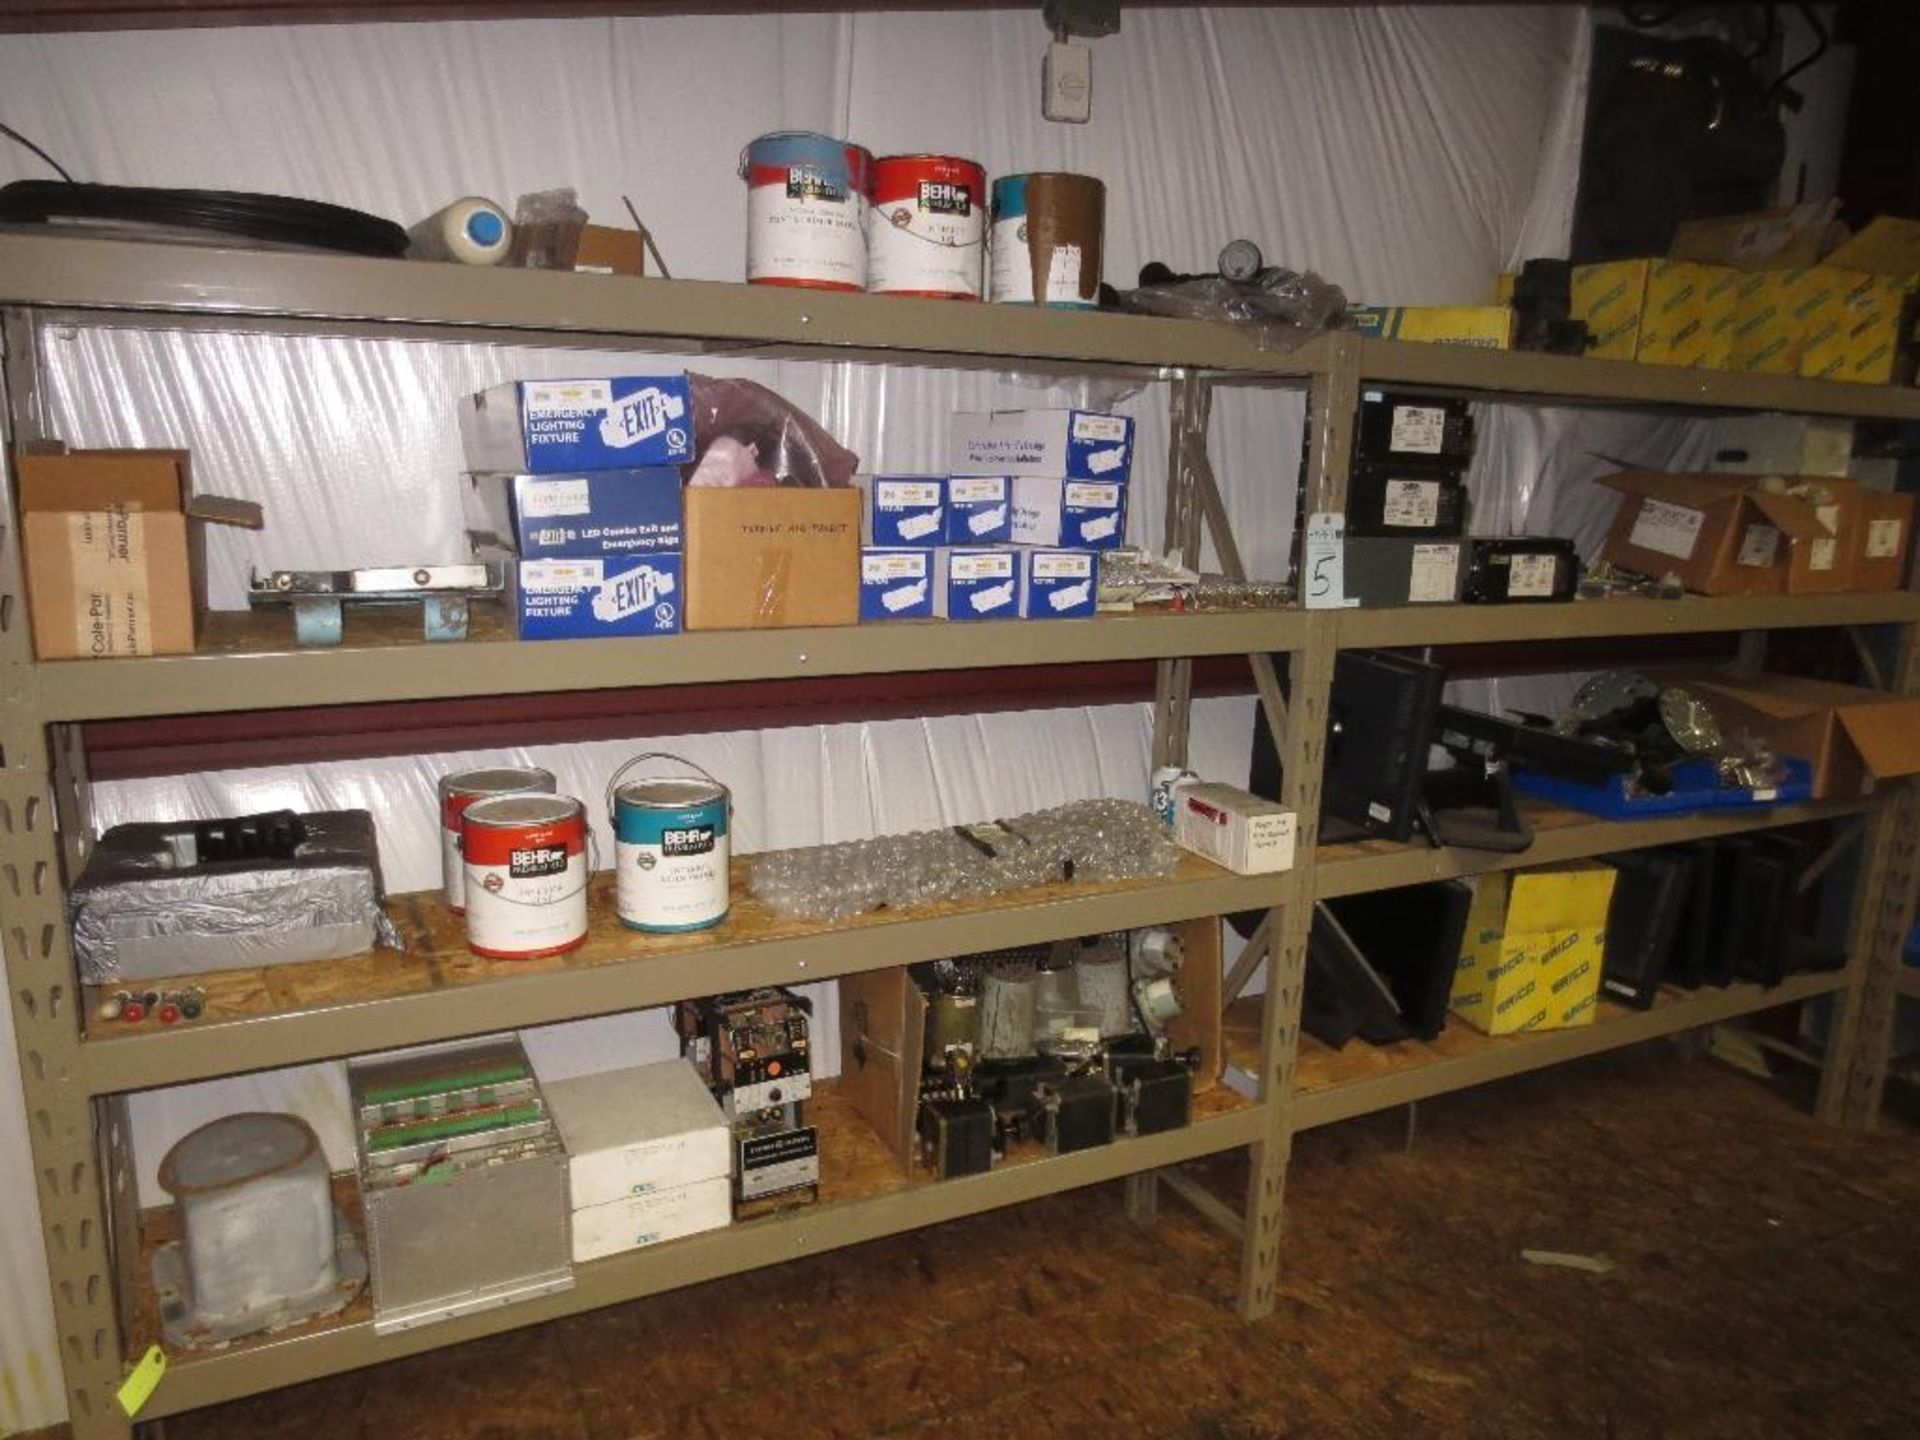 Contents Only on Two Shelves of Monitors, Power Supply's, Emergency Lights, Exit Lights etc.